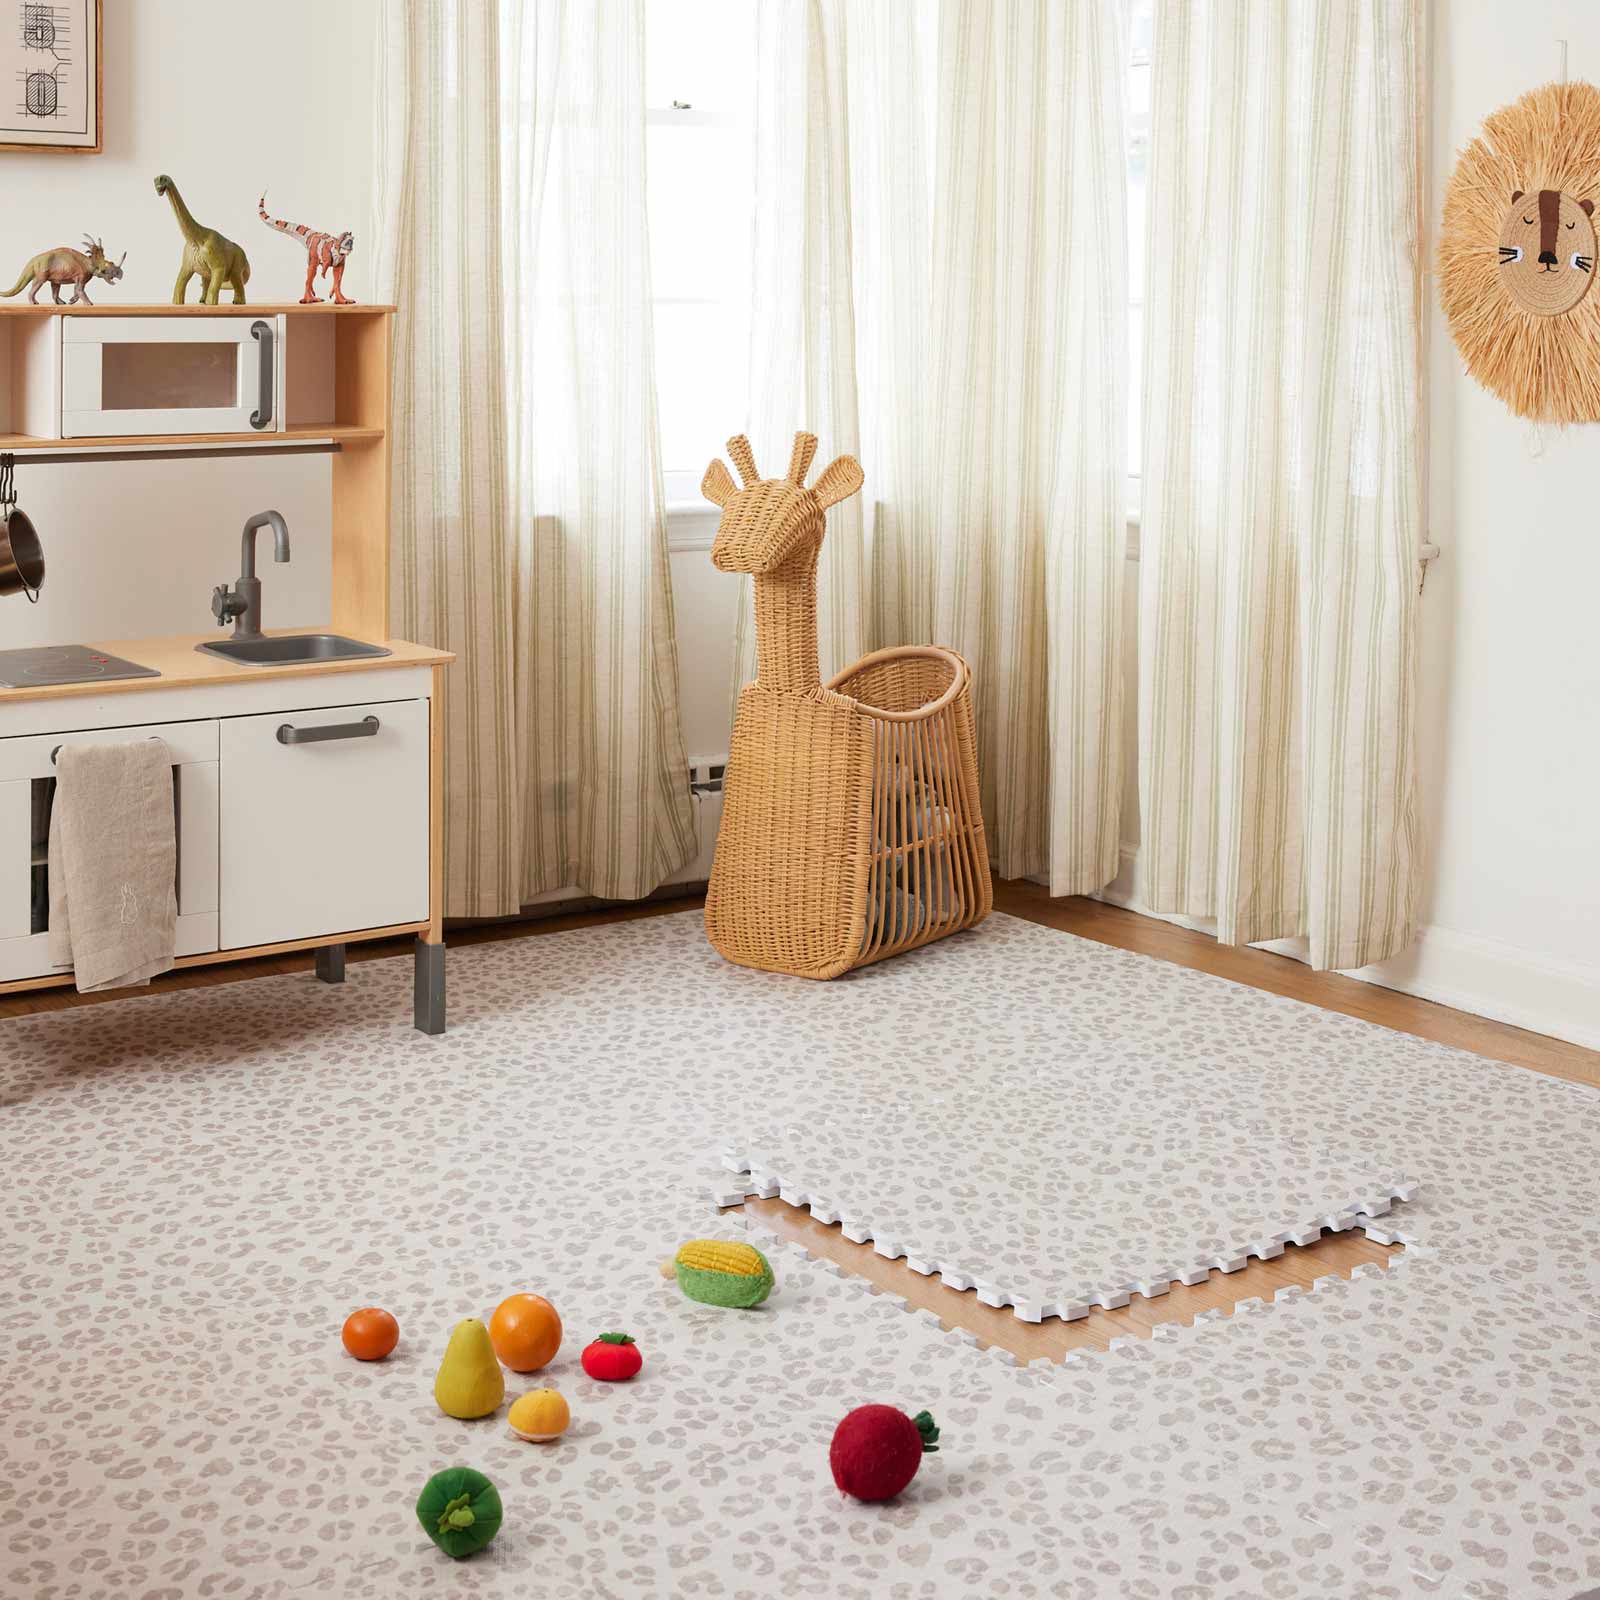 
Parenting With Style
Play Mats. Grown Up.
Unlike old-school fabric alternatives, zero laundering is required. They wipe clean with mild soap and dry in a snap. Plus, they connect seamlessly so you can reconfigure and redecorate at your whim. Other mats are just playing around.
